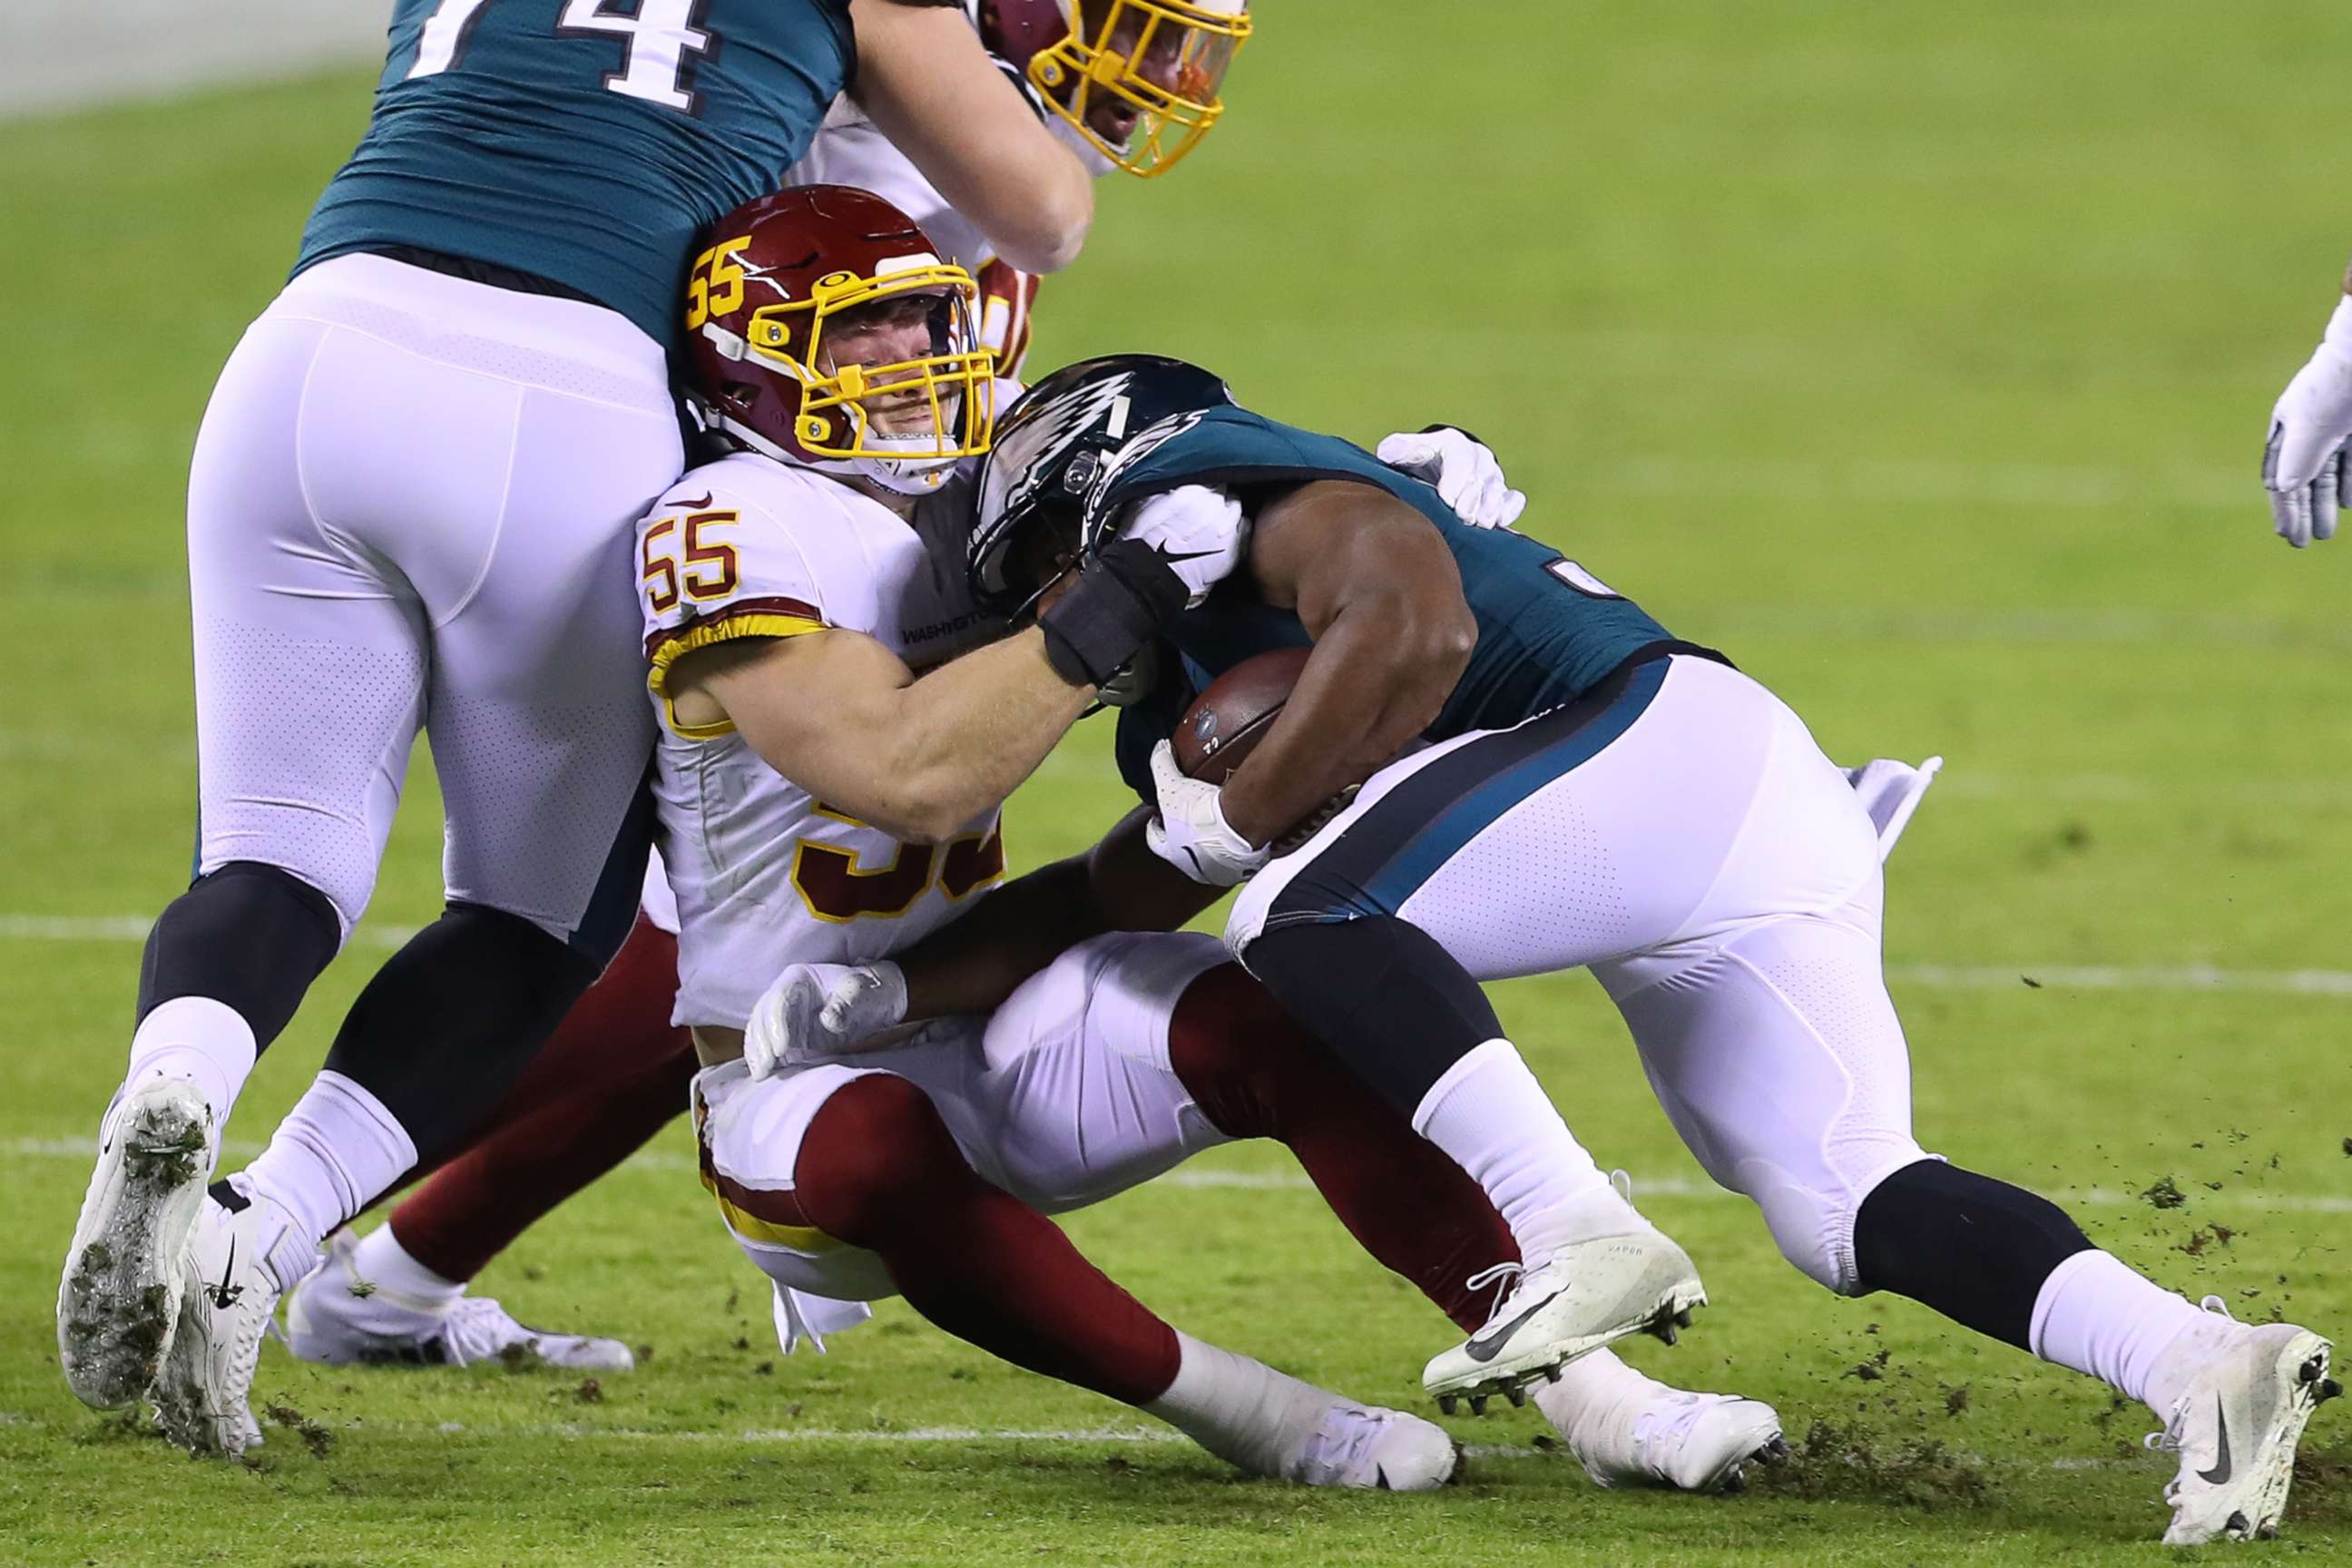 PHOTO: Linebacker Cole Holcomb of the Washington Football Team tackles running back Boston Scott of the Philadelphia Eagles during the first quarter of the game at Lincoln Financial Field on Jan. 03, 2021, in Philadelphia.